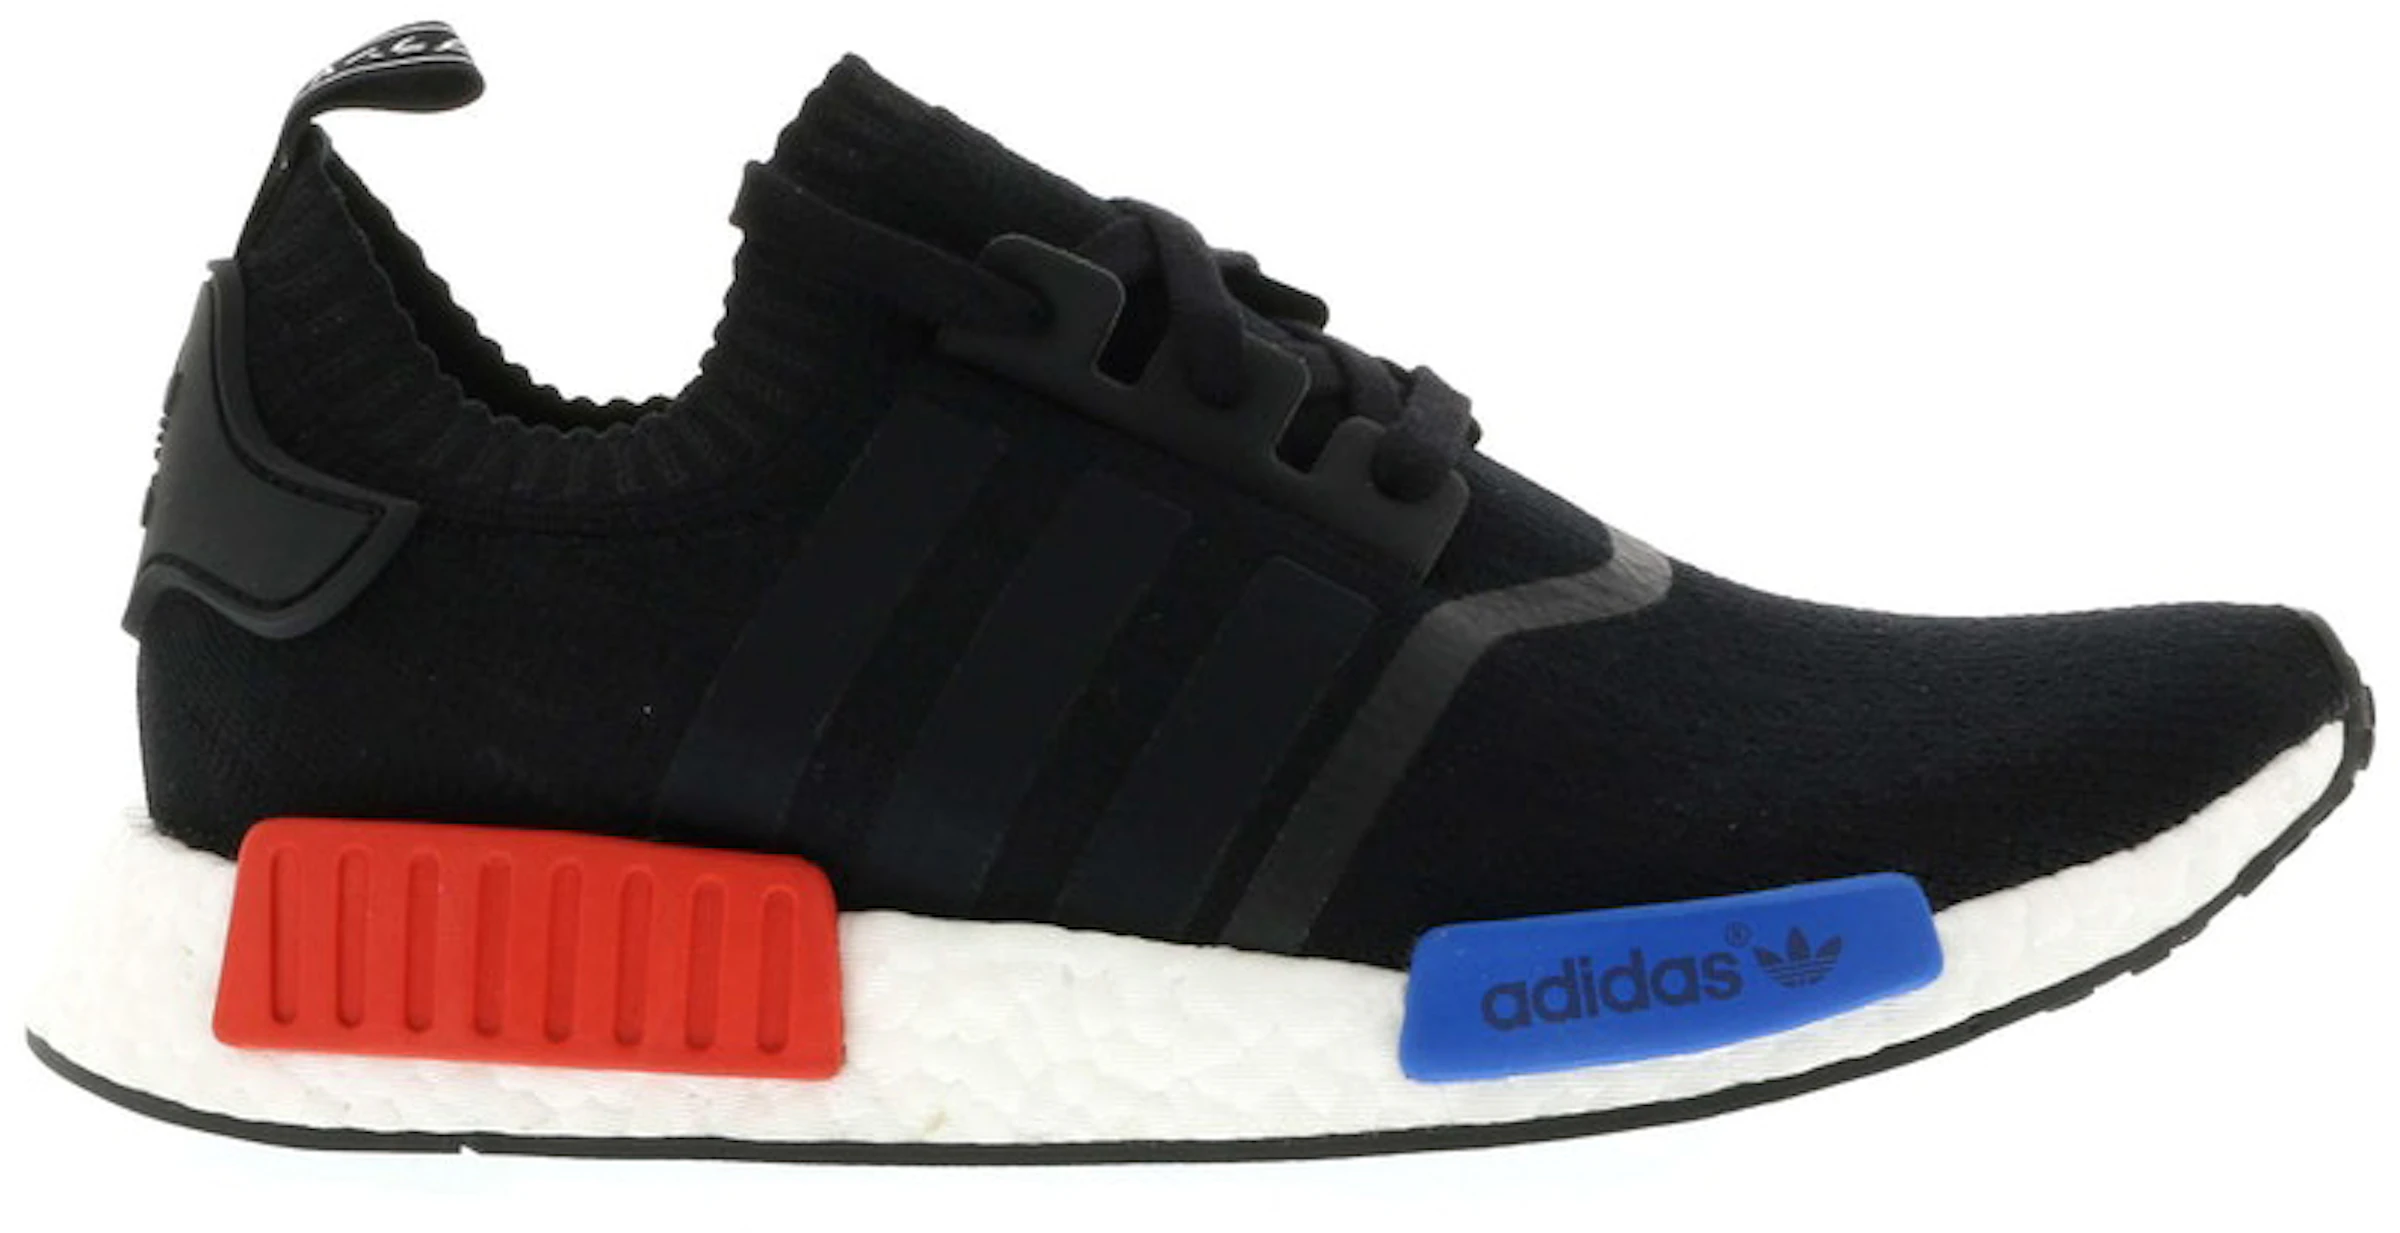 troon snor voor eeuwig adidas NMD - All Sizes & Colorways at StockX